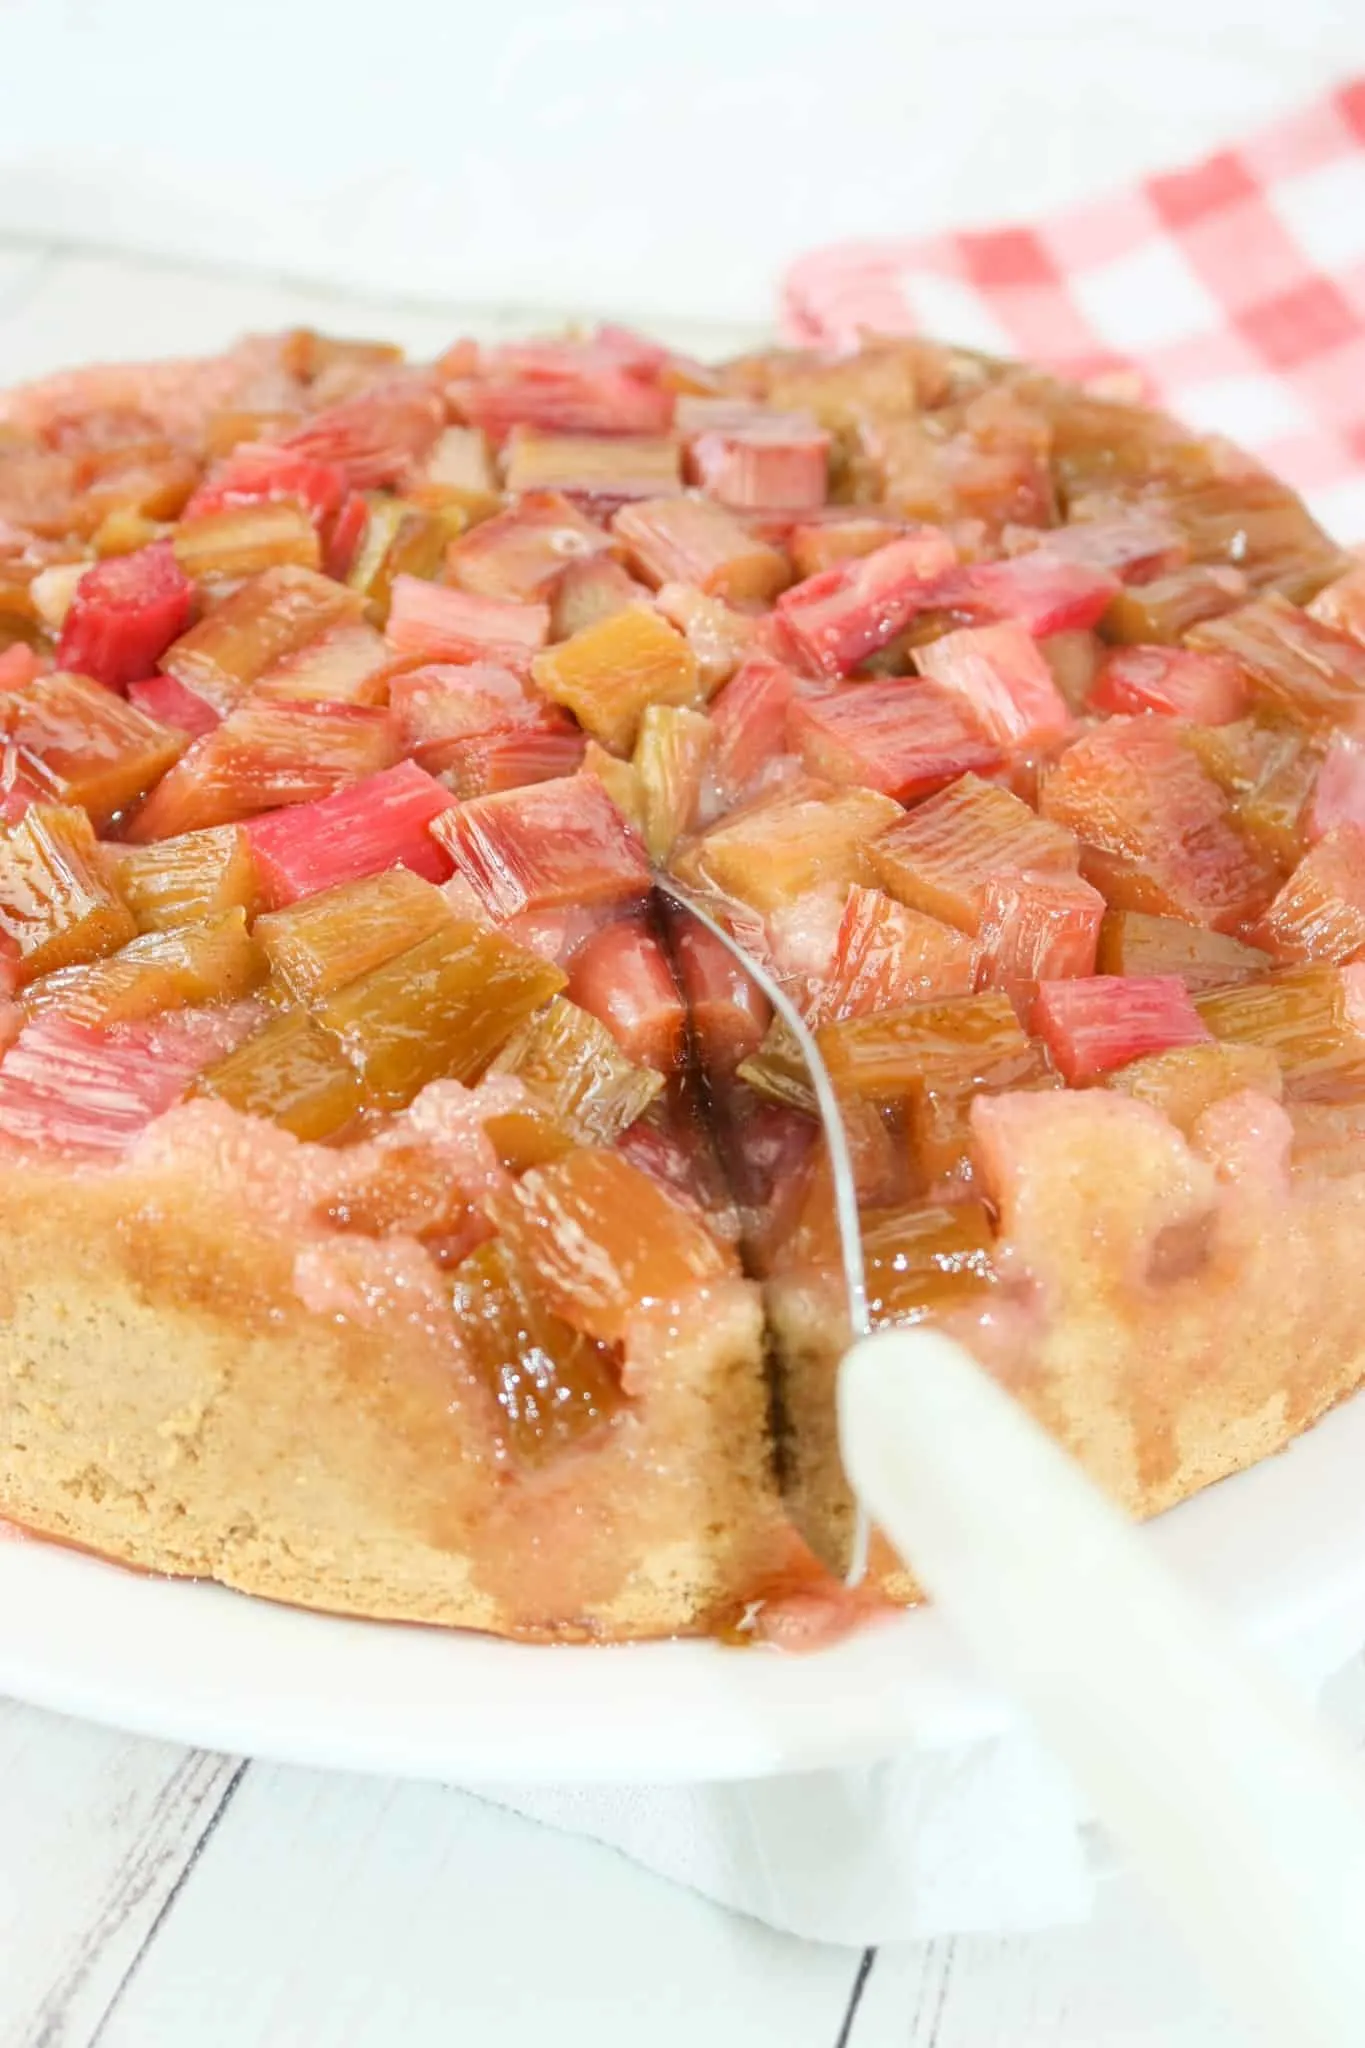 Rhubarb Upside Down Cake is a delicious and easy way to use up that seasonal vegetable that we treat more like a fruit!  This gluten free cake is a moist and flavourful dessert for all to enjoy.